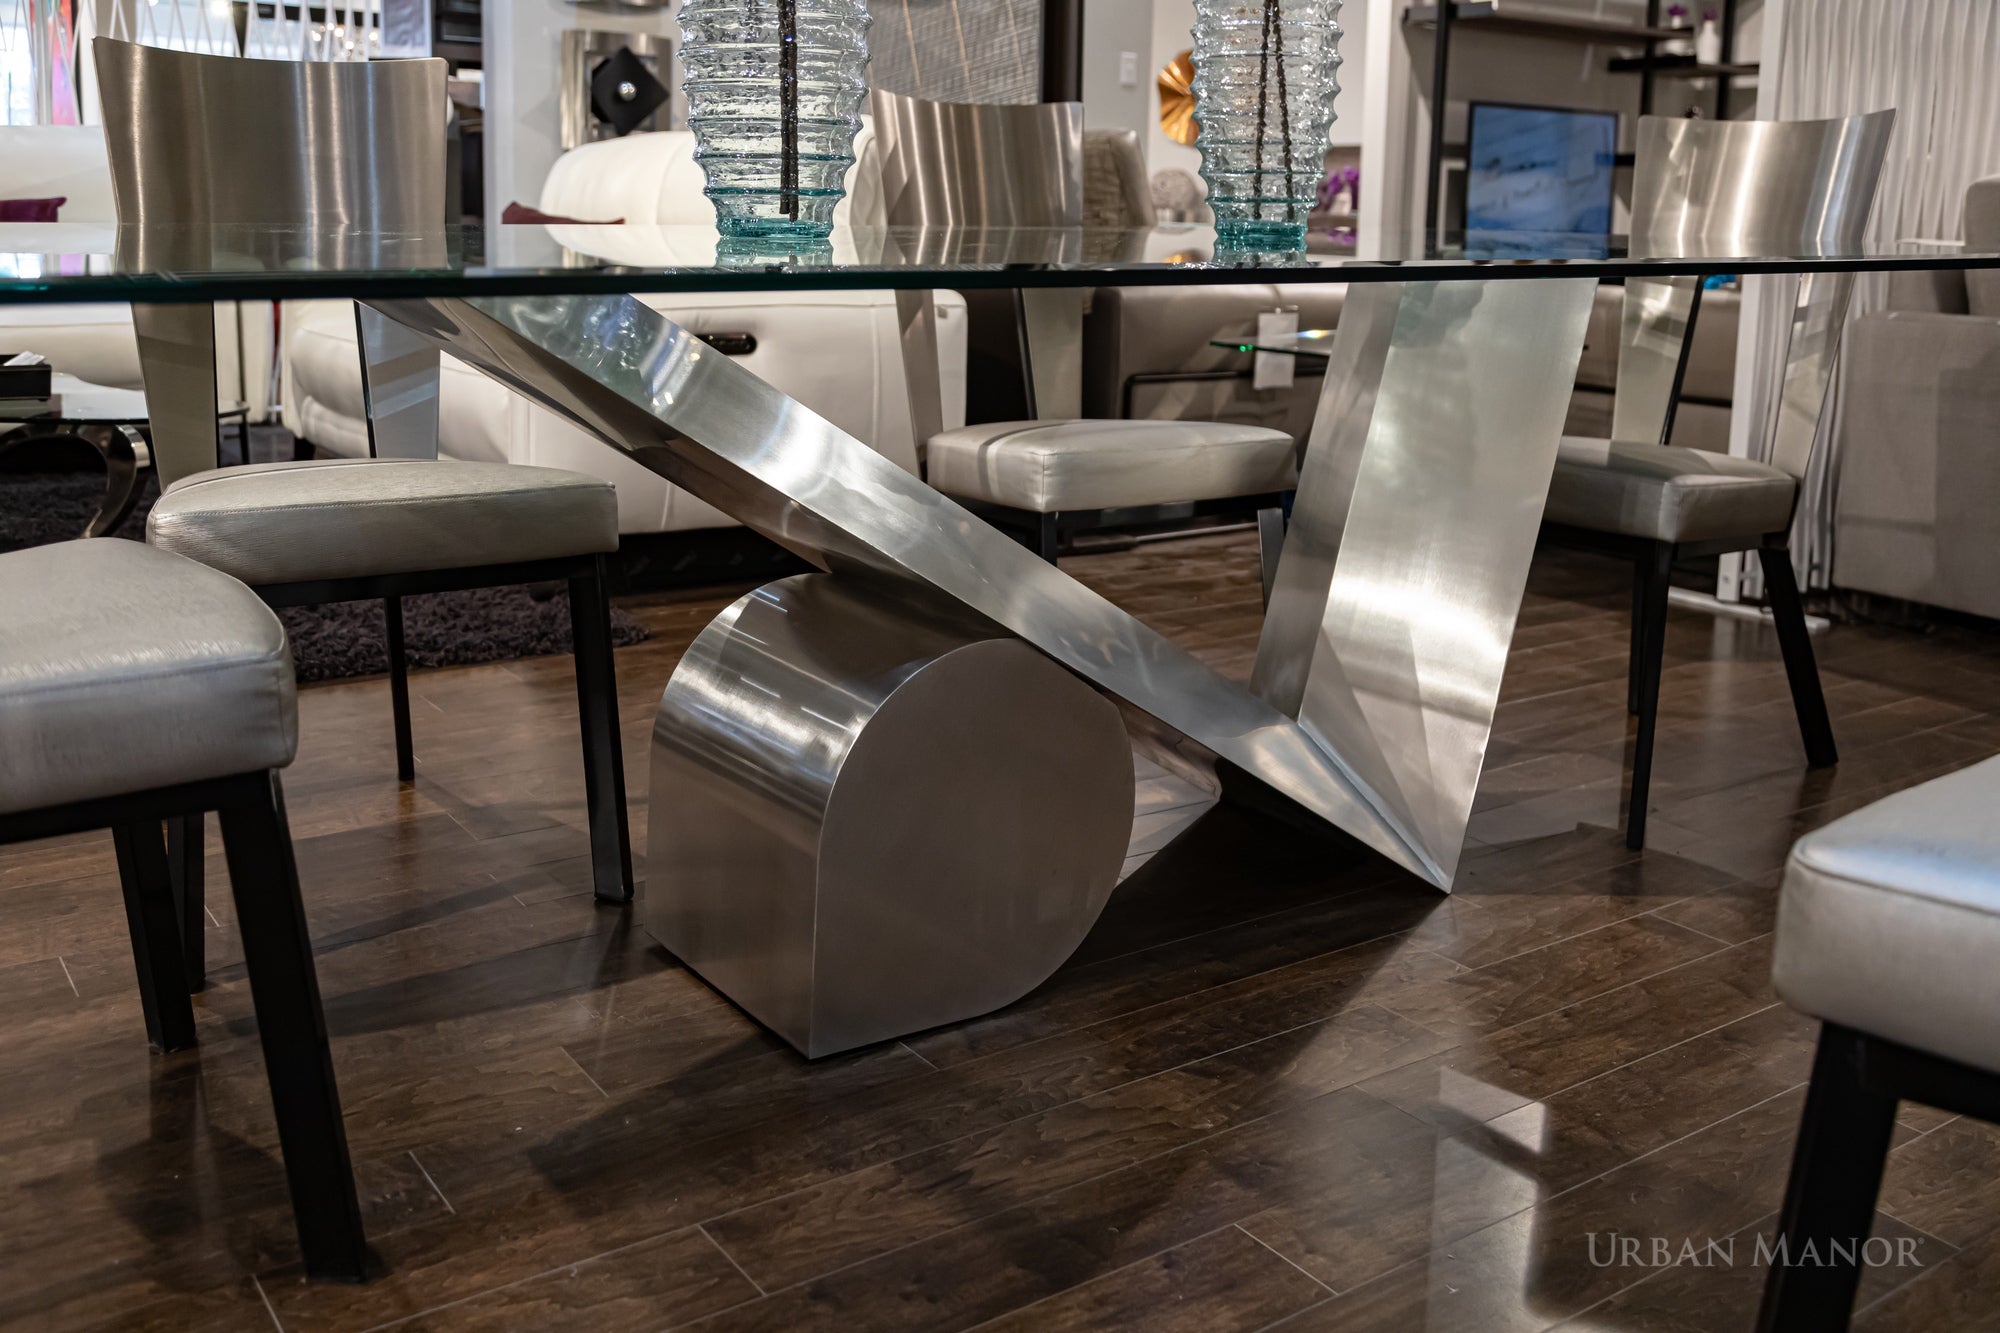 Tyson Brushed Stainless Steel 96" Dining Table